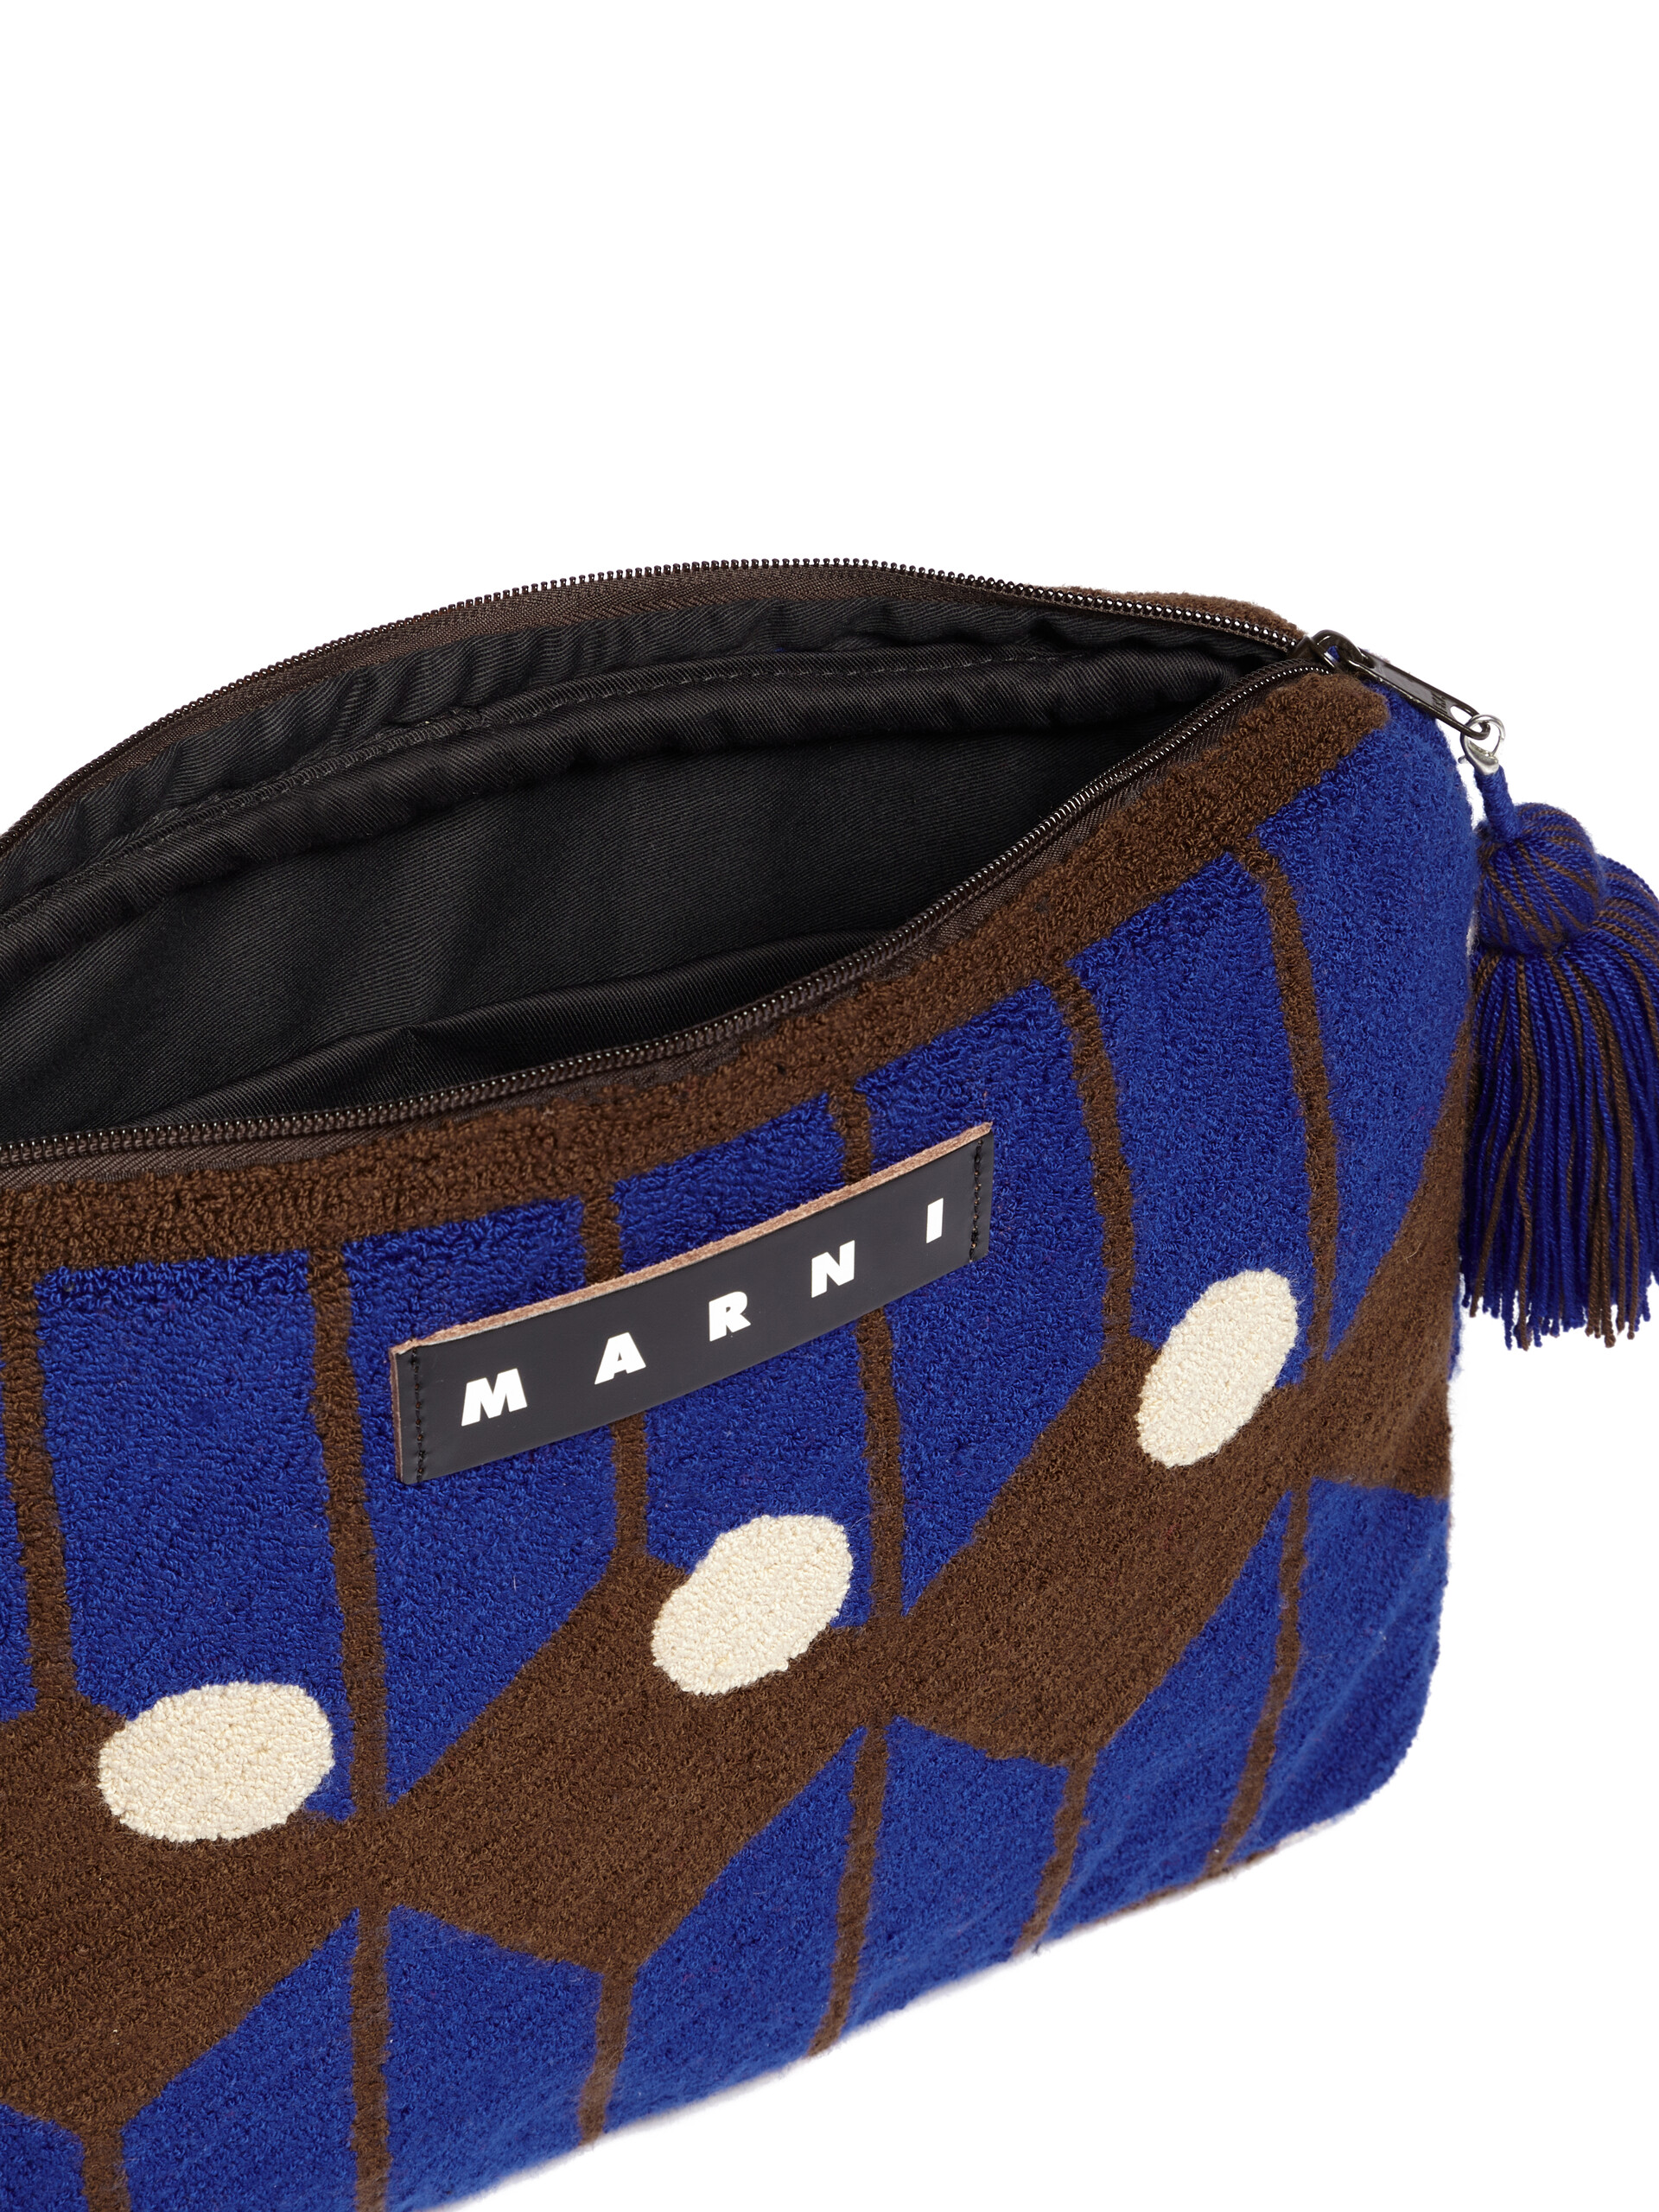 Blue and brown Marni Market wool laptop case - Accessories - Image 4